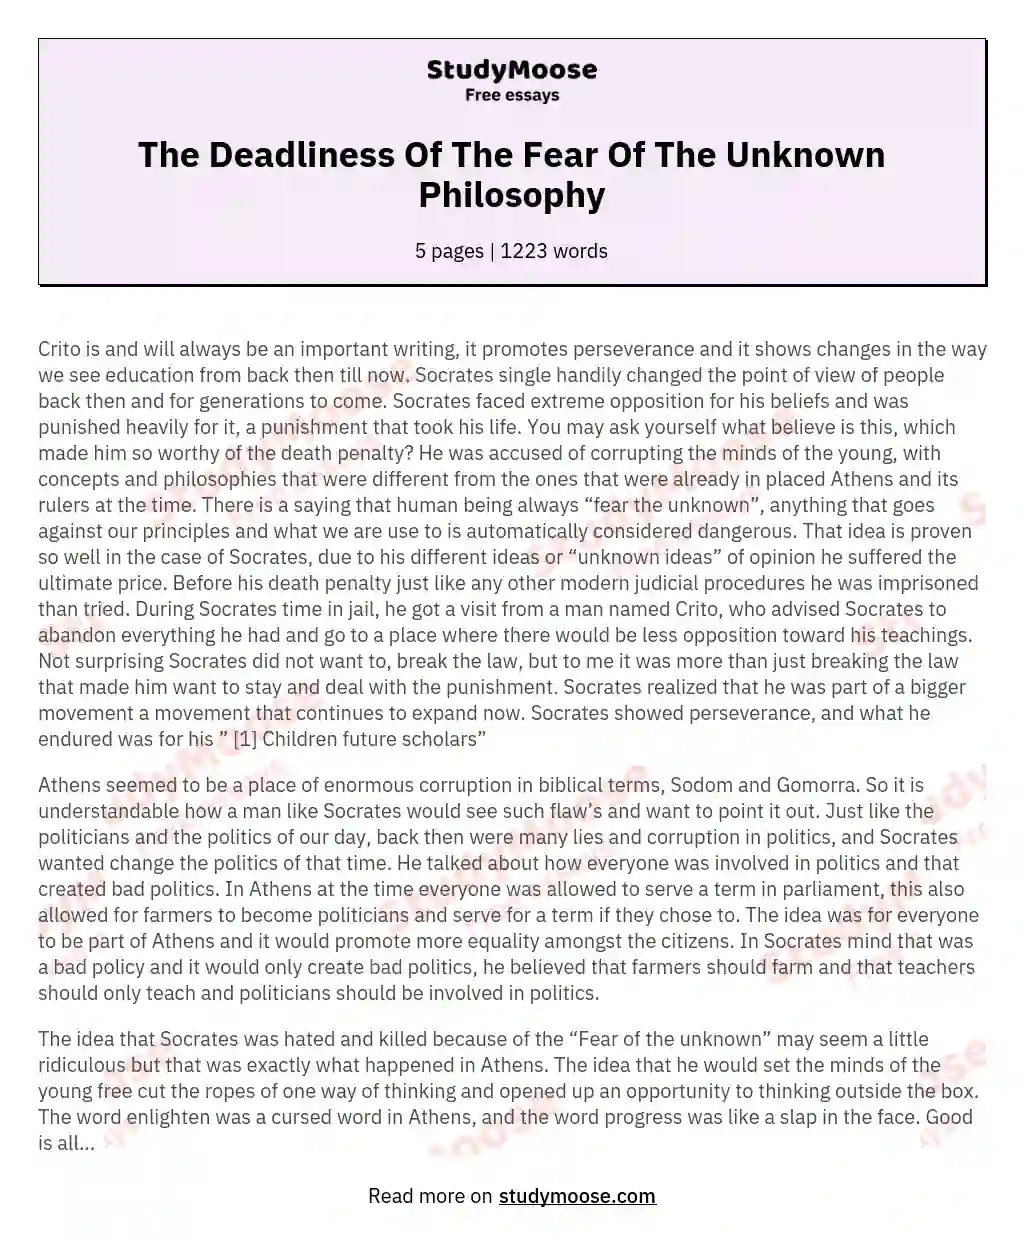 The Deadliness Of The Fear Of The Unknown Philosophy essay